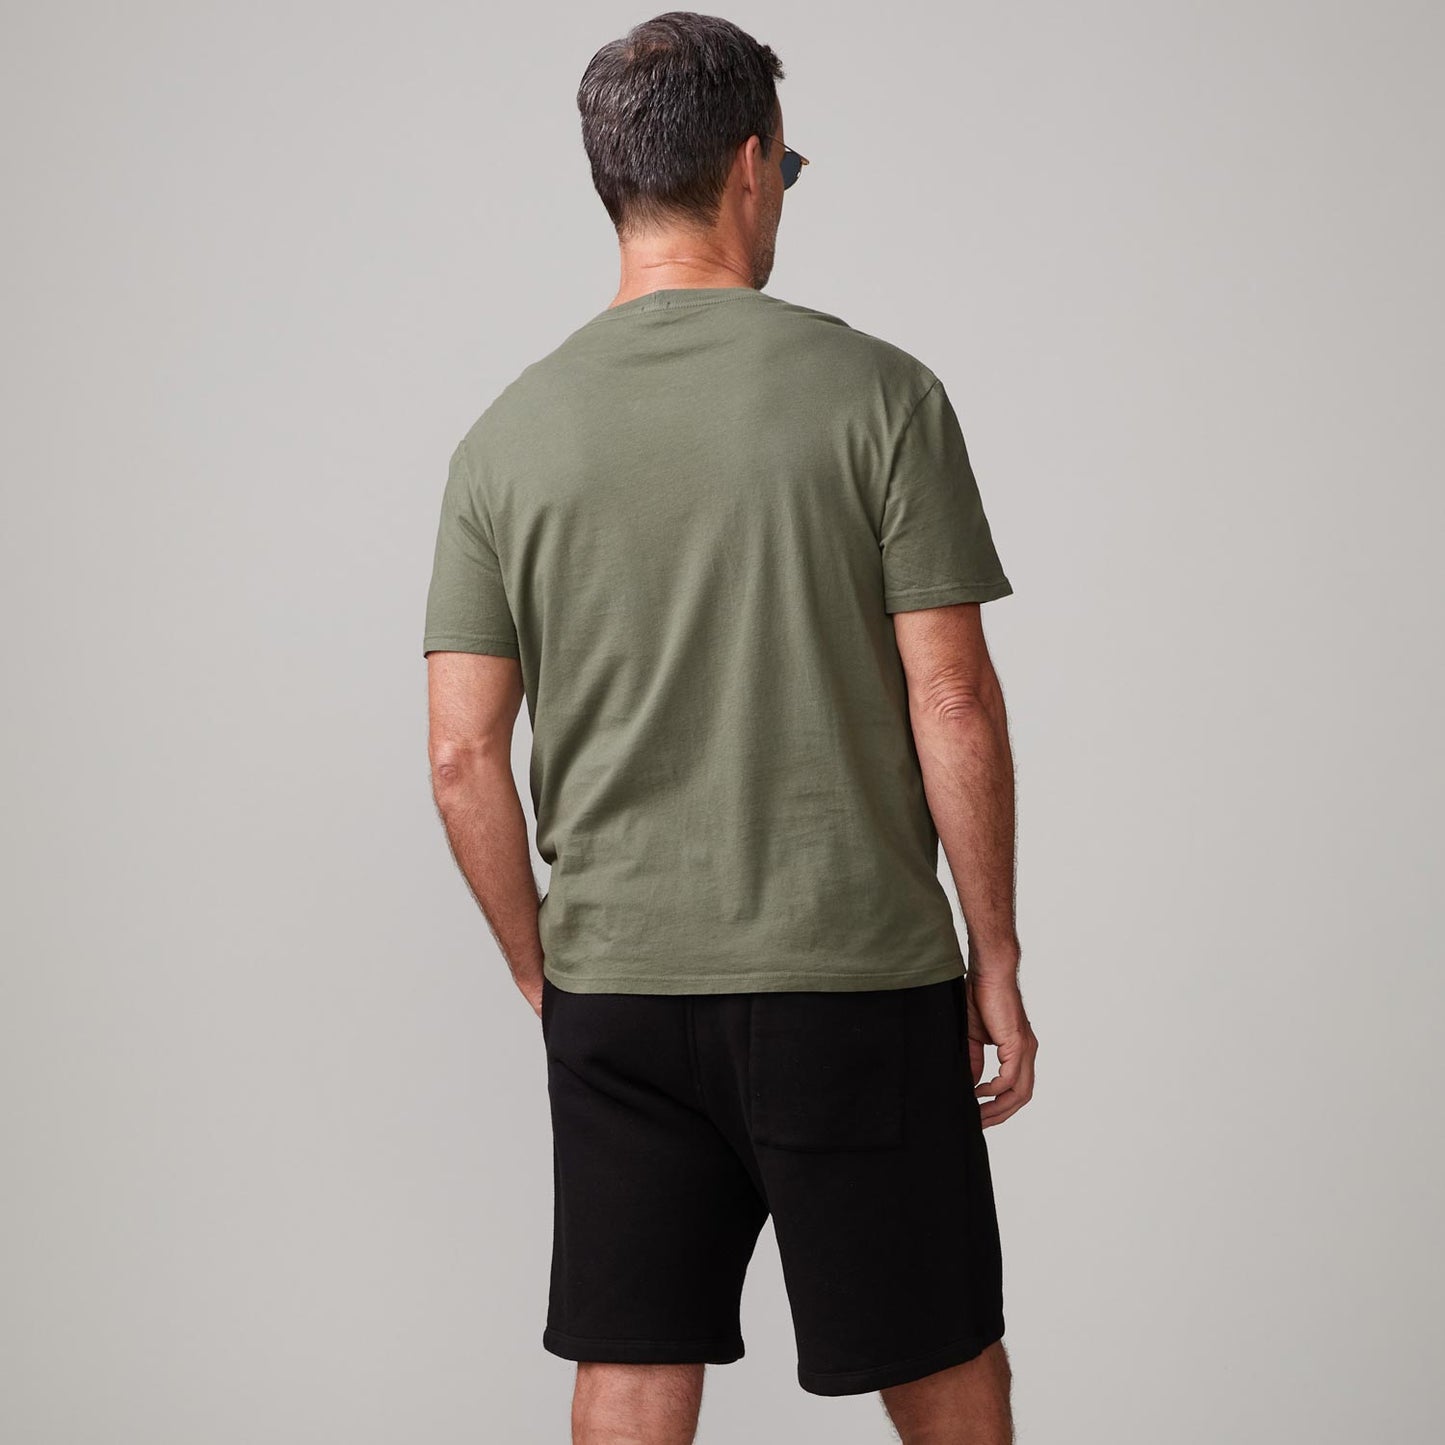 Back view of model wearing the relaxed pocket crew in general green.